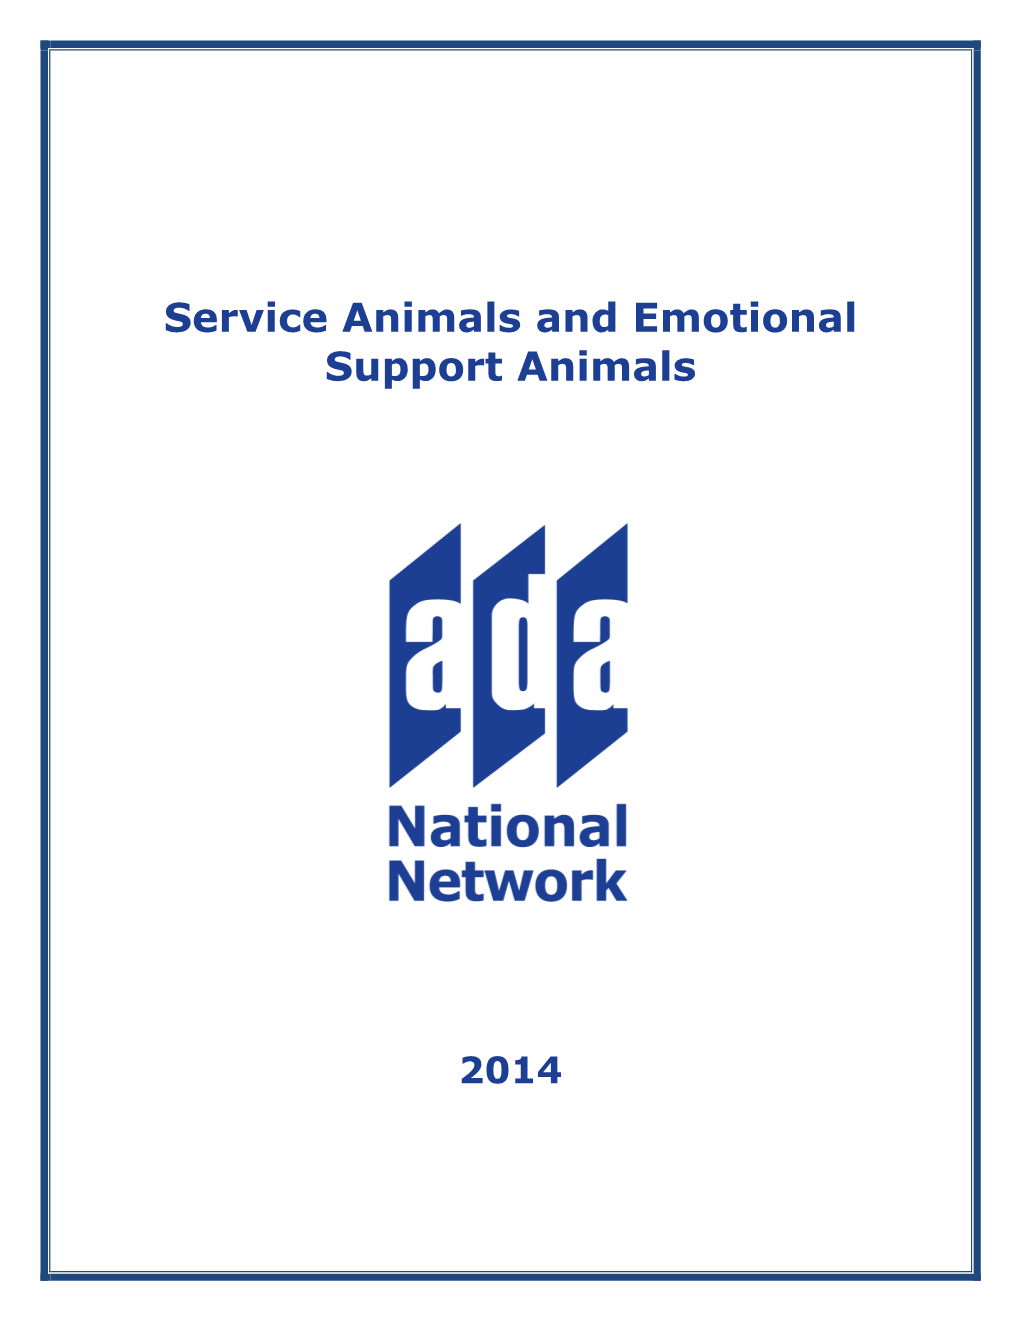 Service Animals and Emotional Support Animals